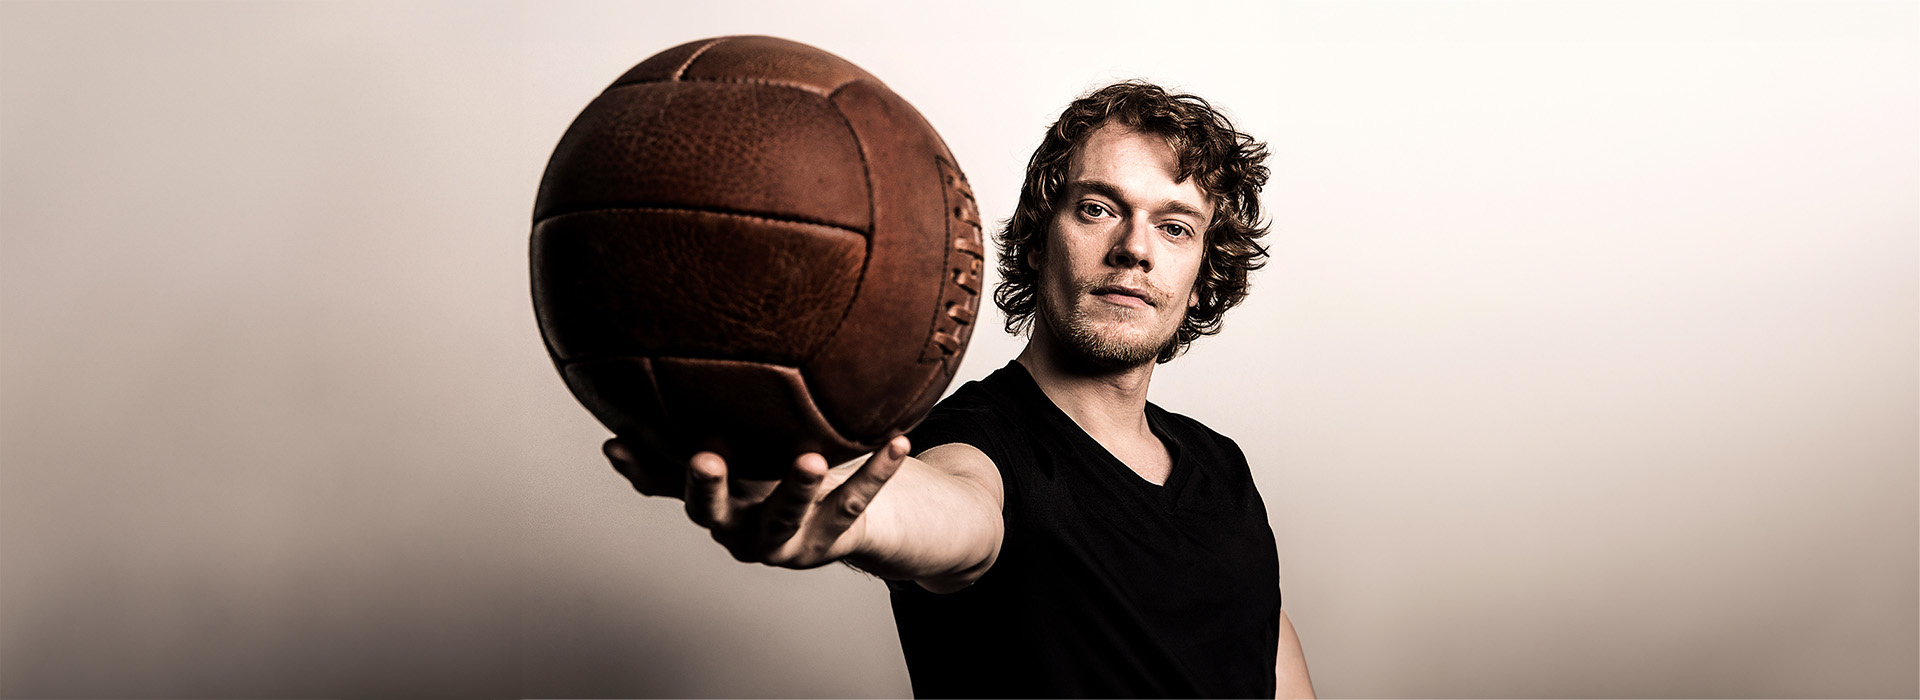 Series poster Football: A Brief History by Alfie Allen